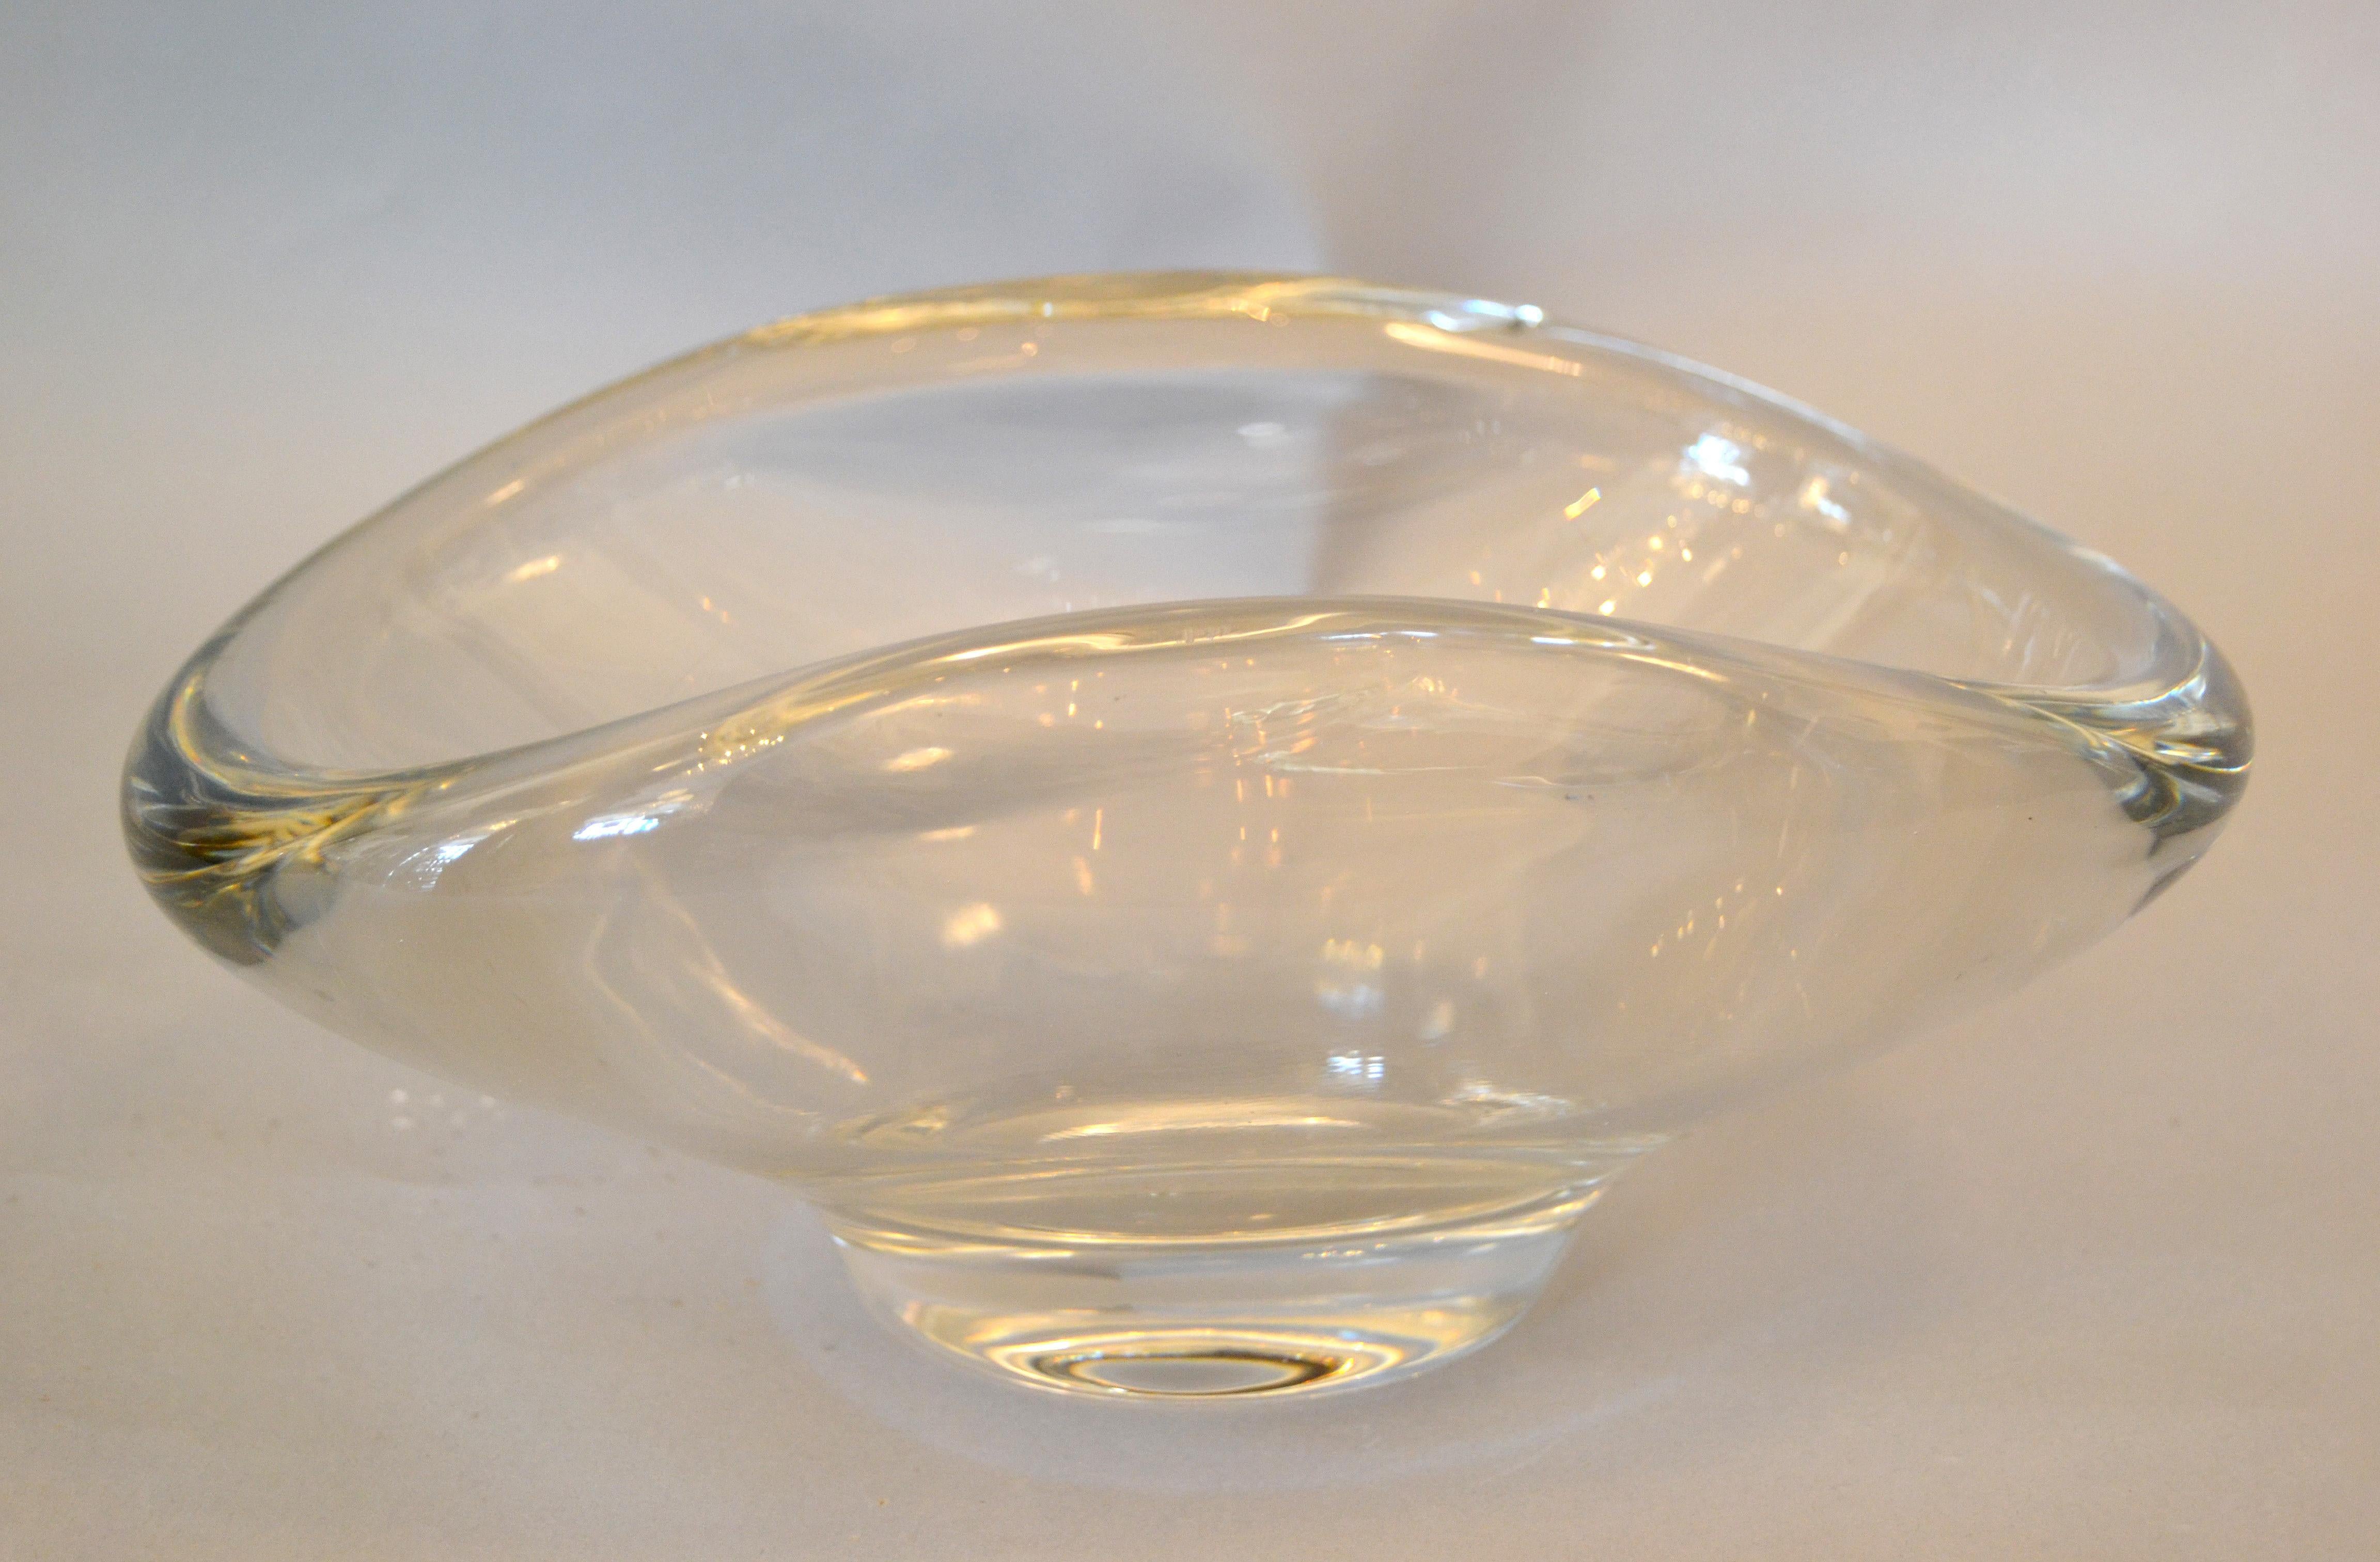 American Mid-Century Modern hand molded crystal glass clear bowl by Fostoria.
Can be used as a bowl, centerpiece or to serve your favourite candy.
Makers Mark under the bowl.